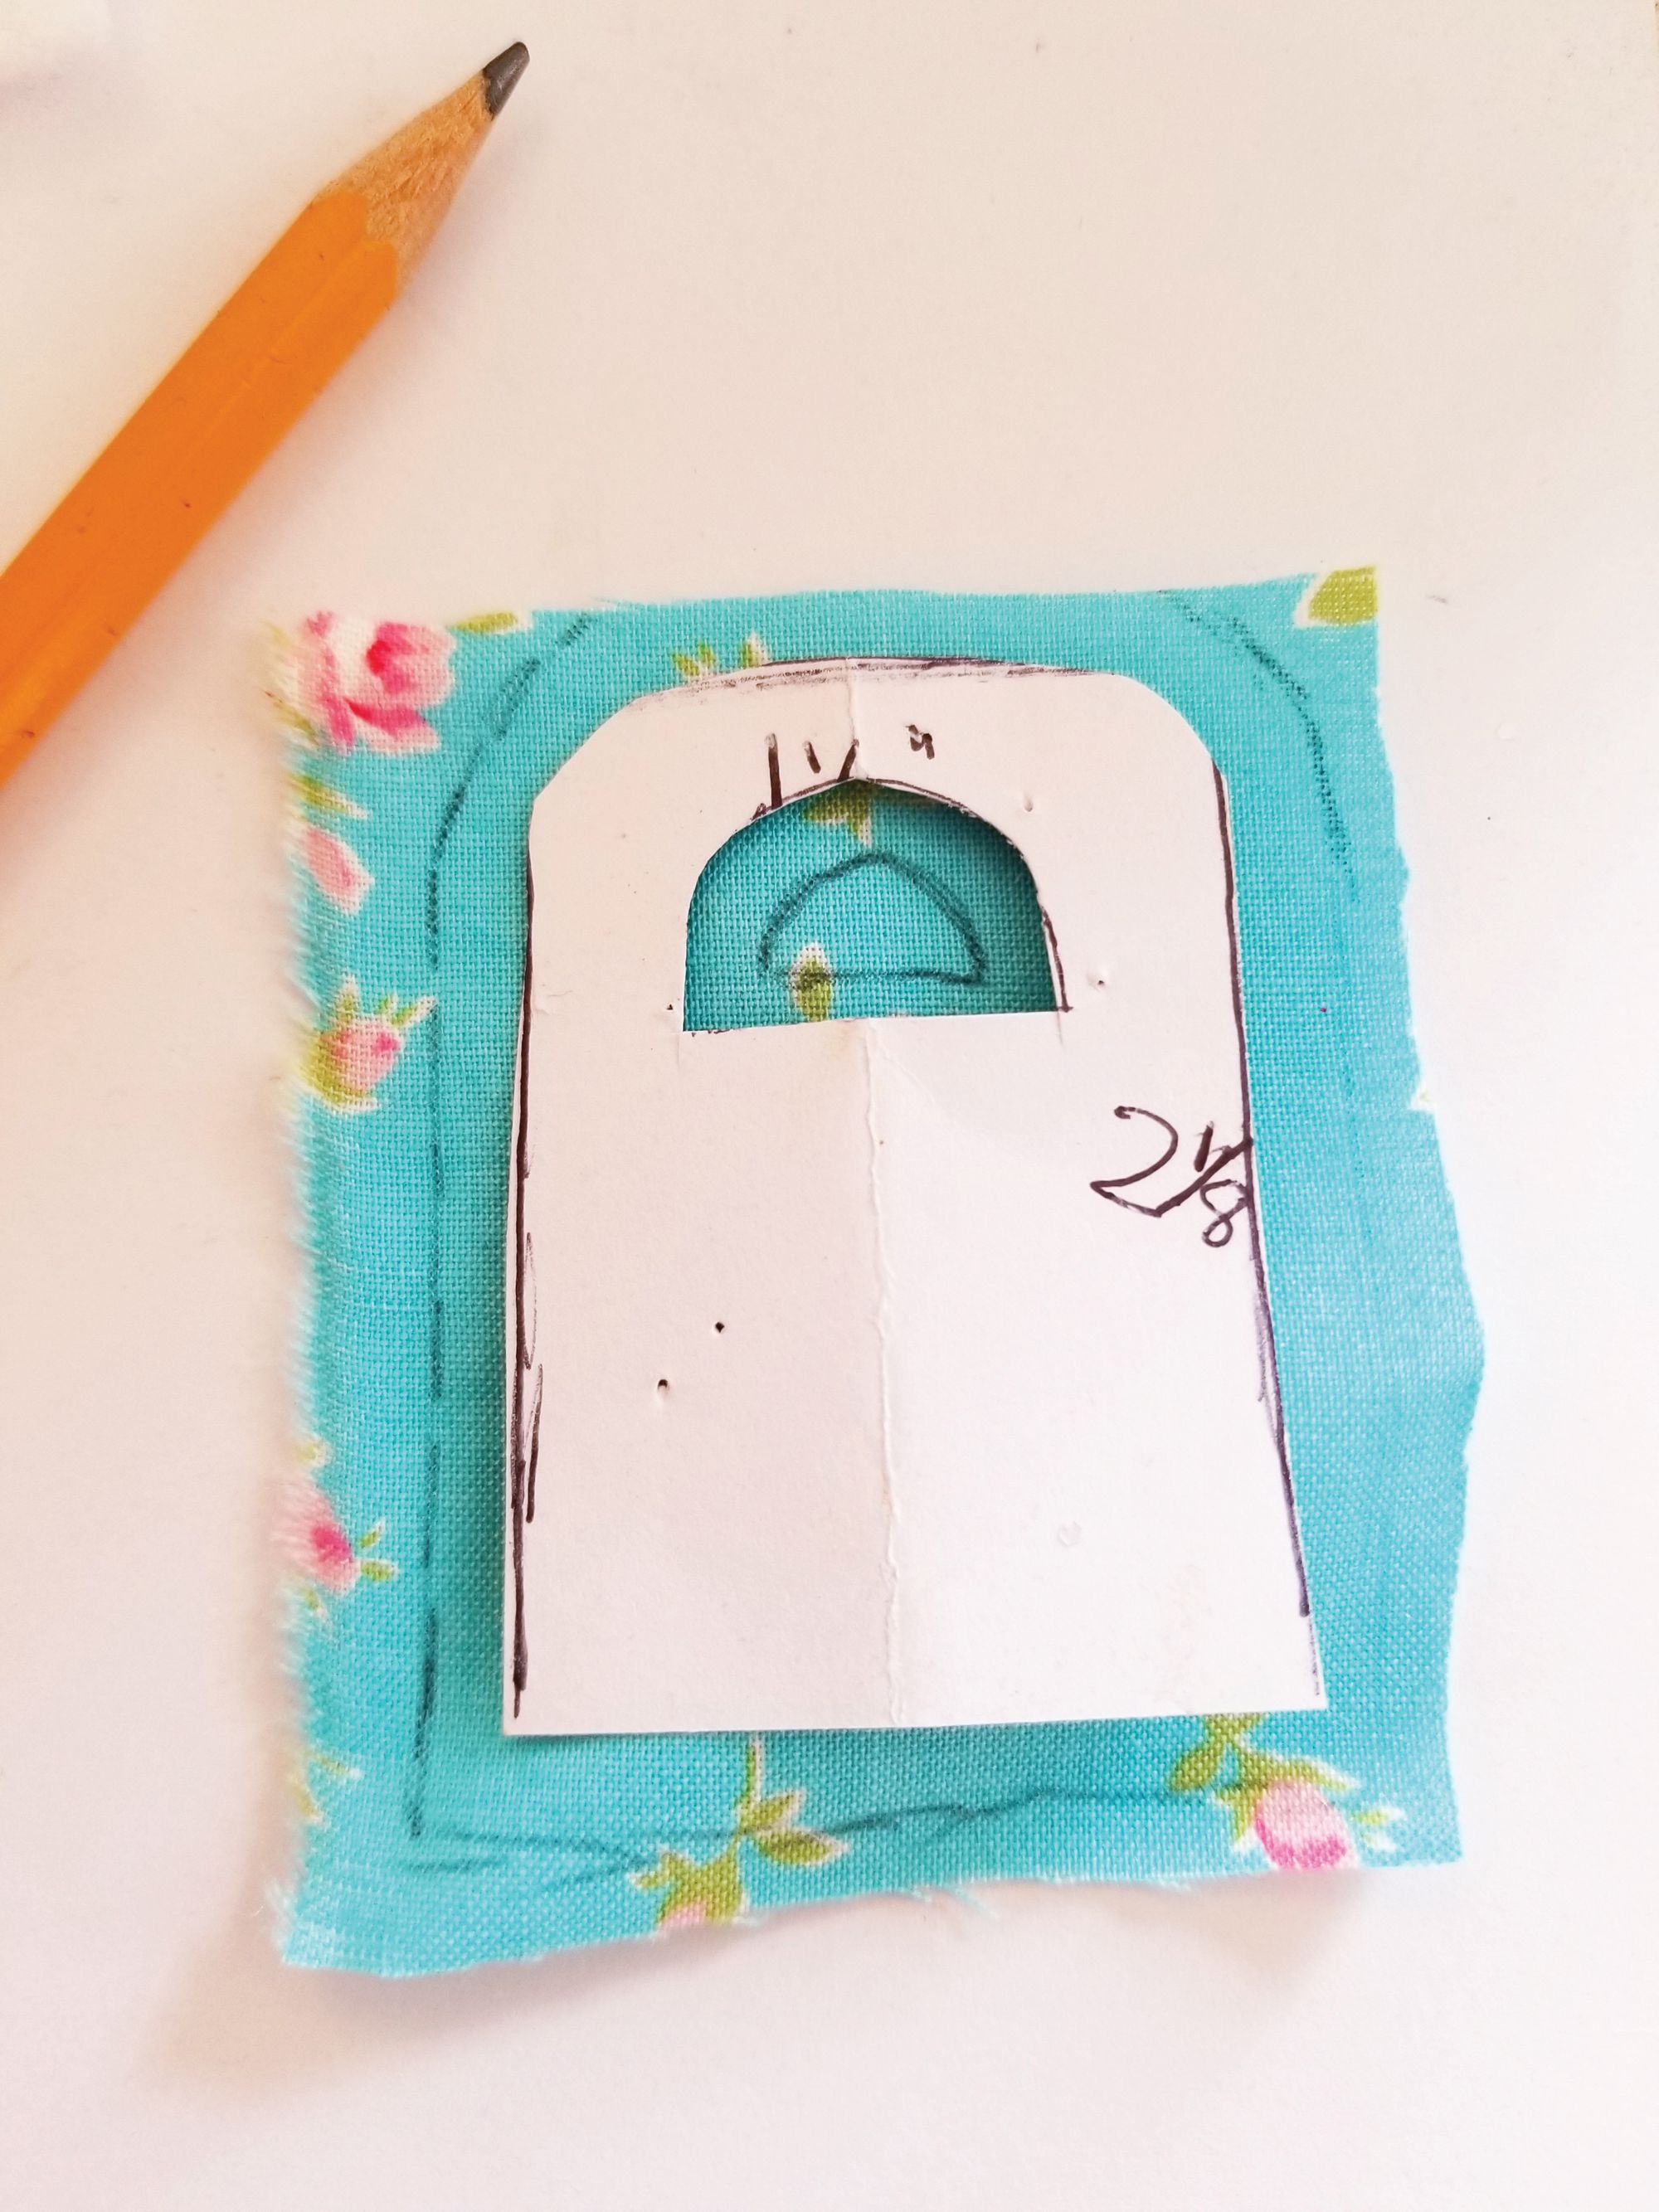 Make a pretty little
bag to hold pegs